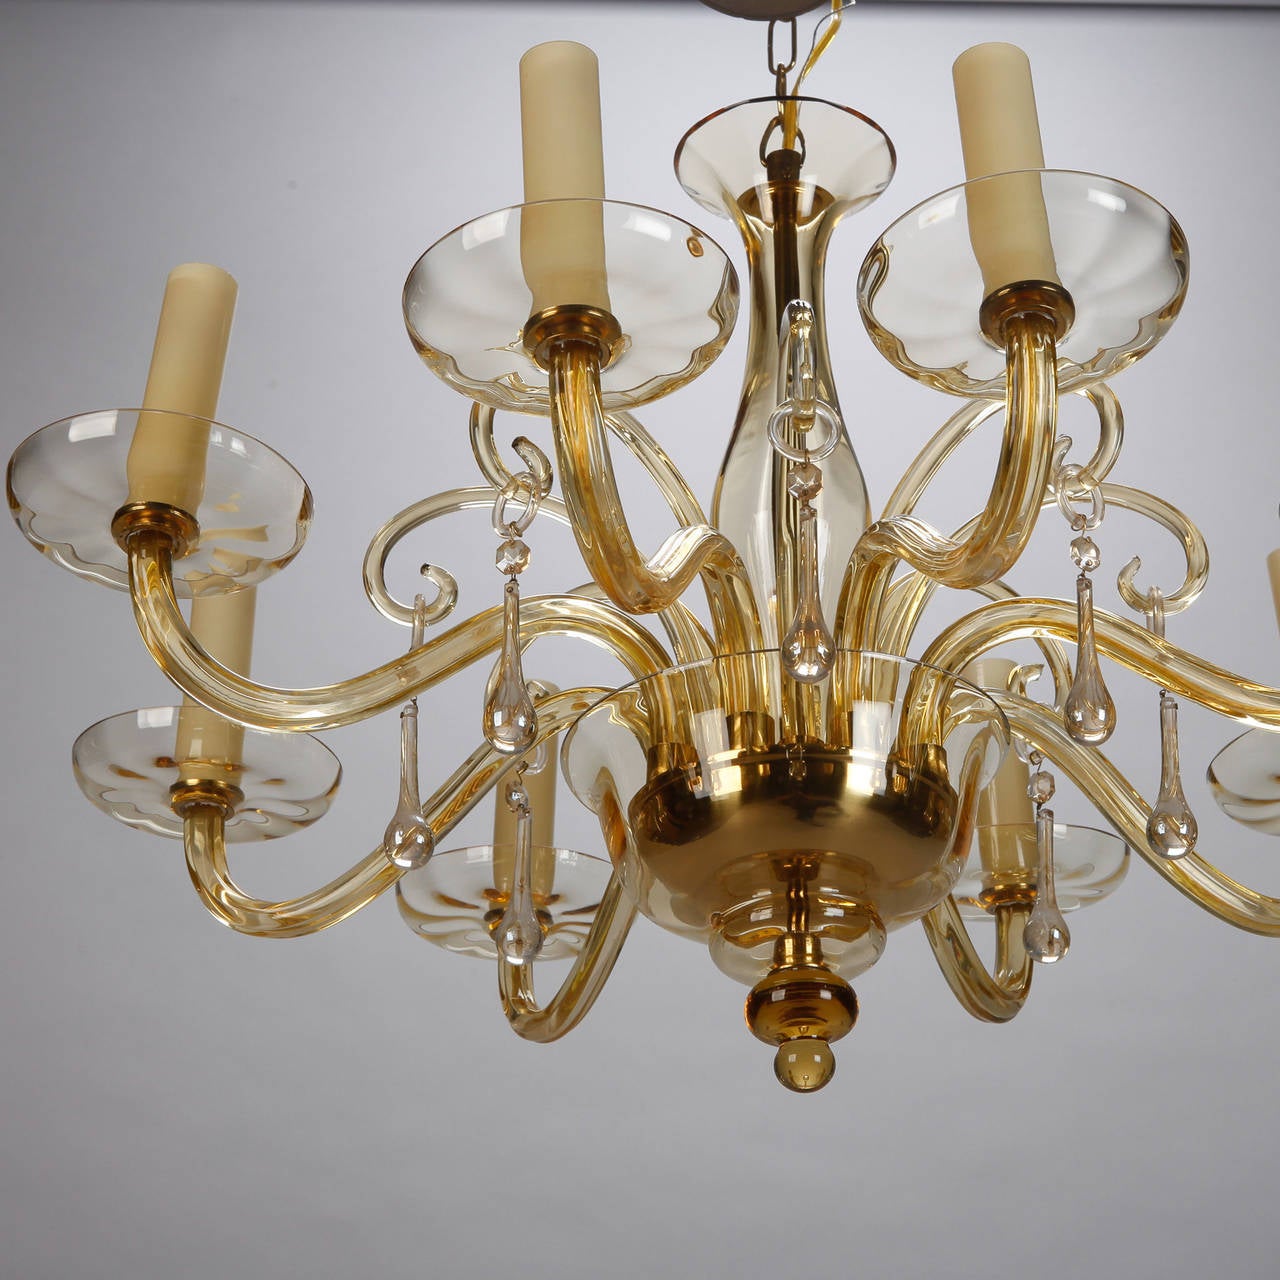 Mid-20th Century Eight Arm Amber Murano Glass Chandelier With Drops